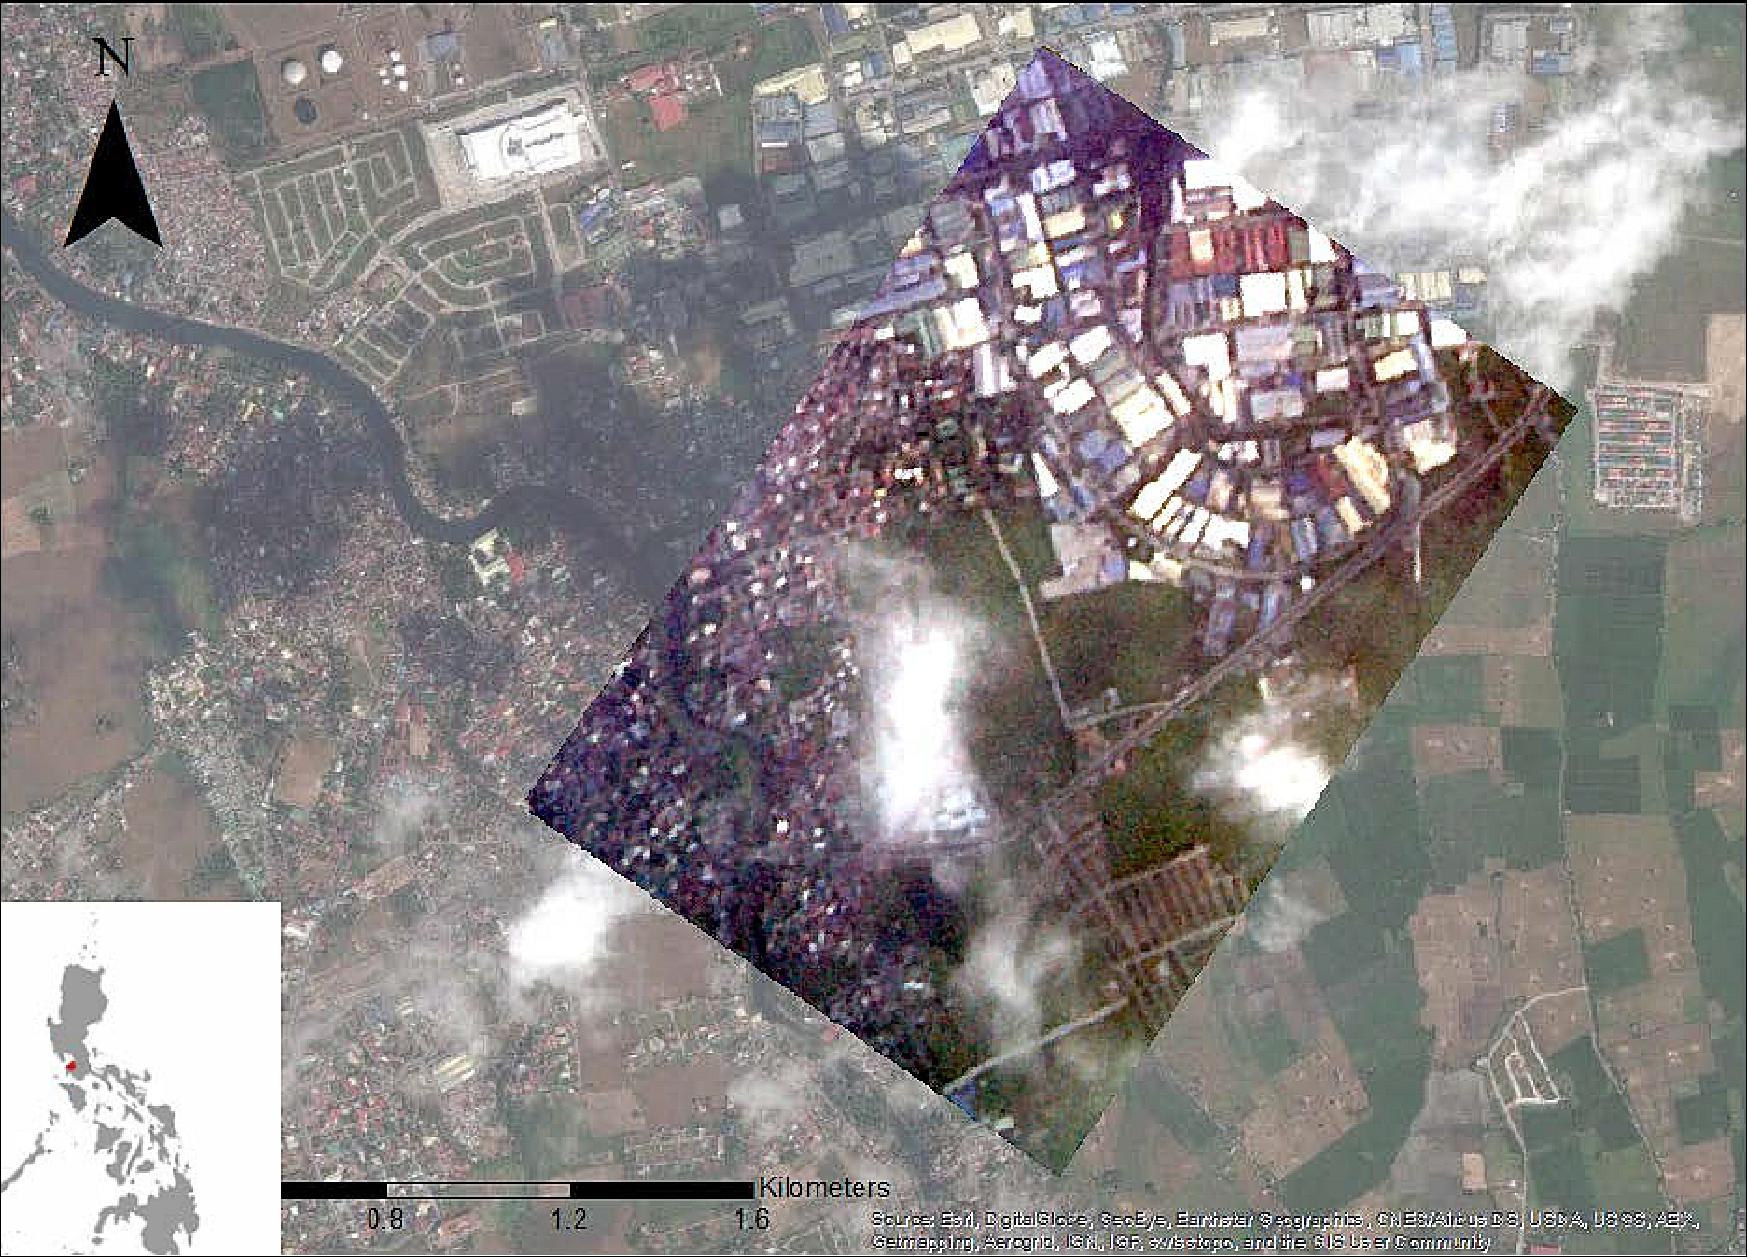 Figure 10: HPT (High Precision Telescope) image of Rosario, Cavite, Philippines, captured on 24 August 2016 at 07:23:59 PHT, (image credit: DOST/ASTI)